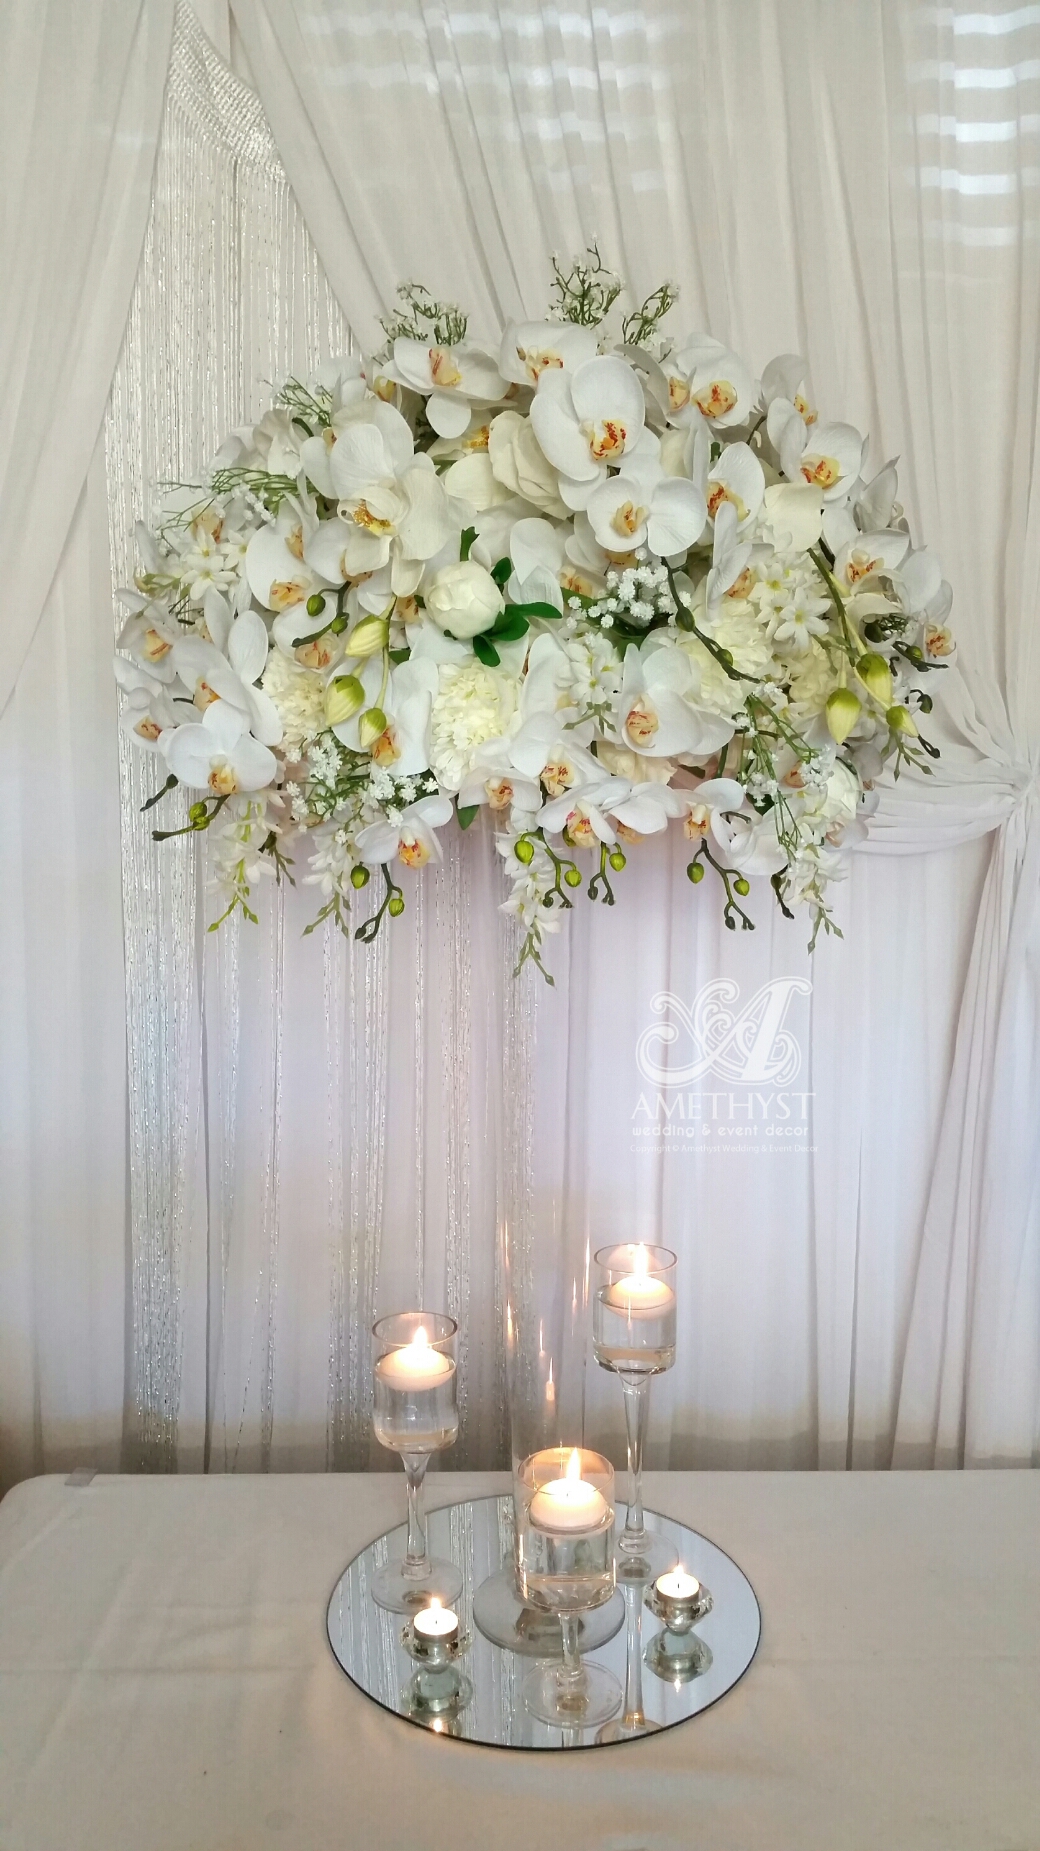 Tall White Orchid Centerpiece - more info >>